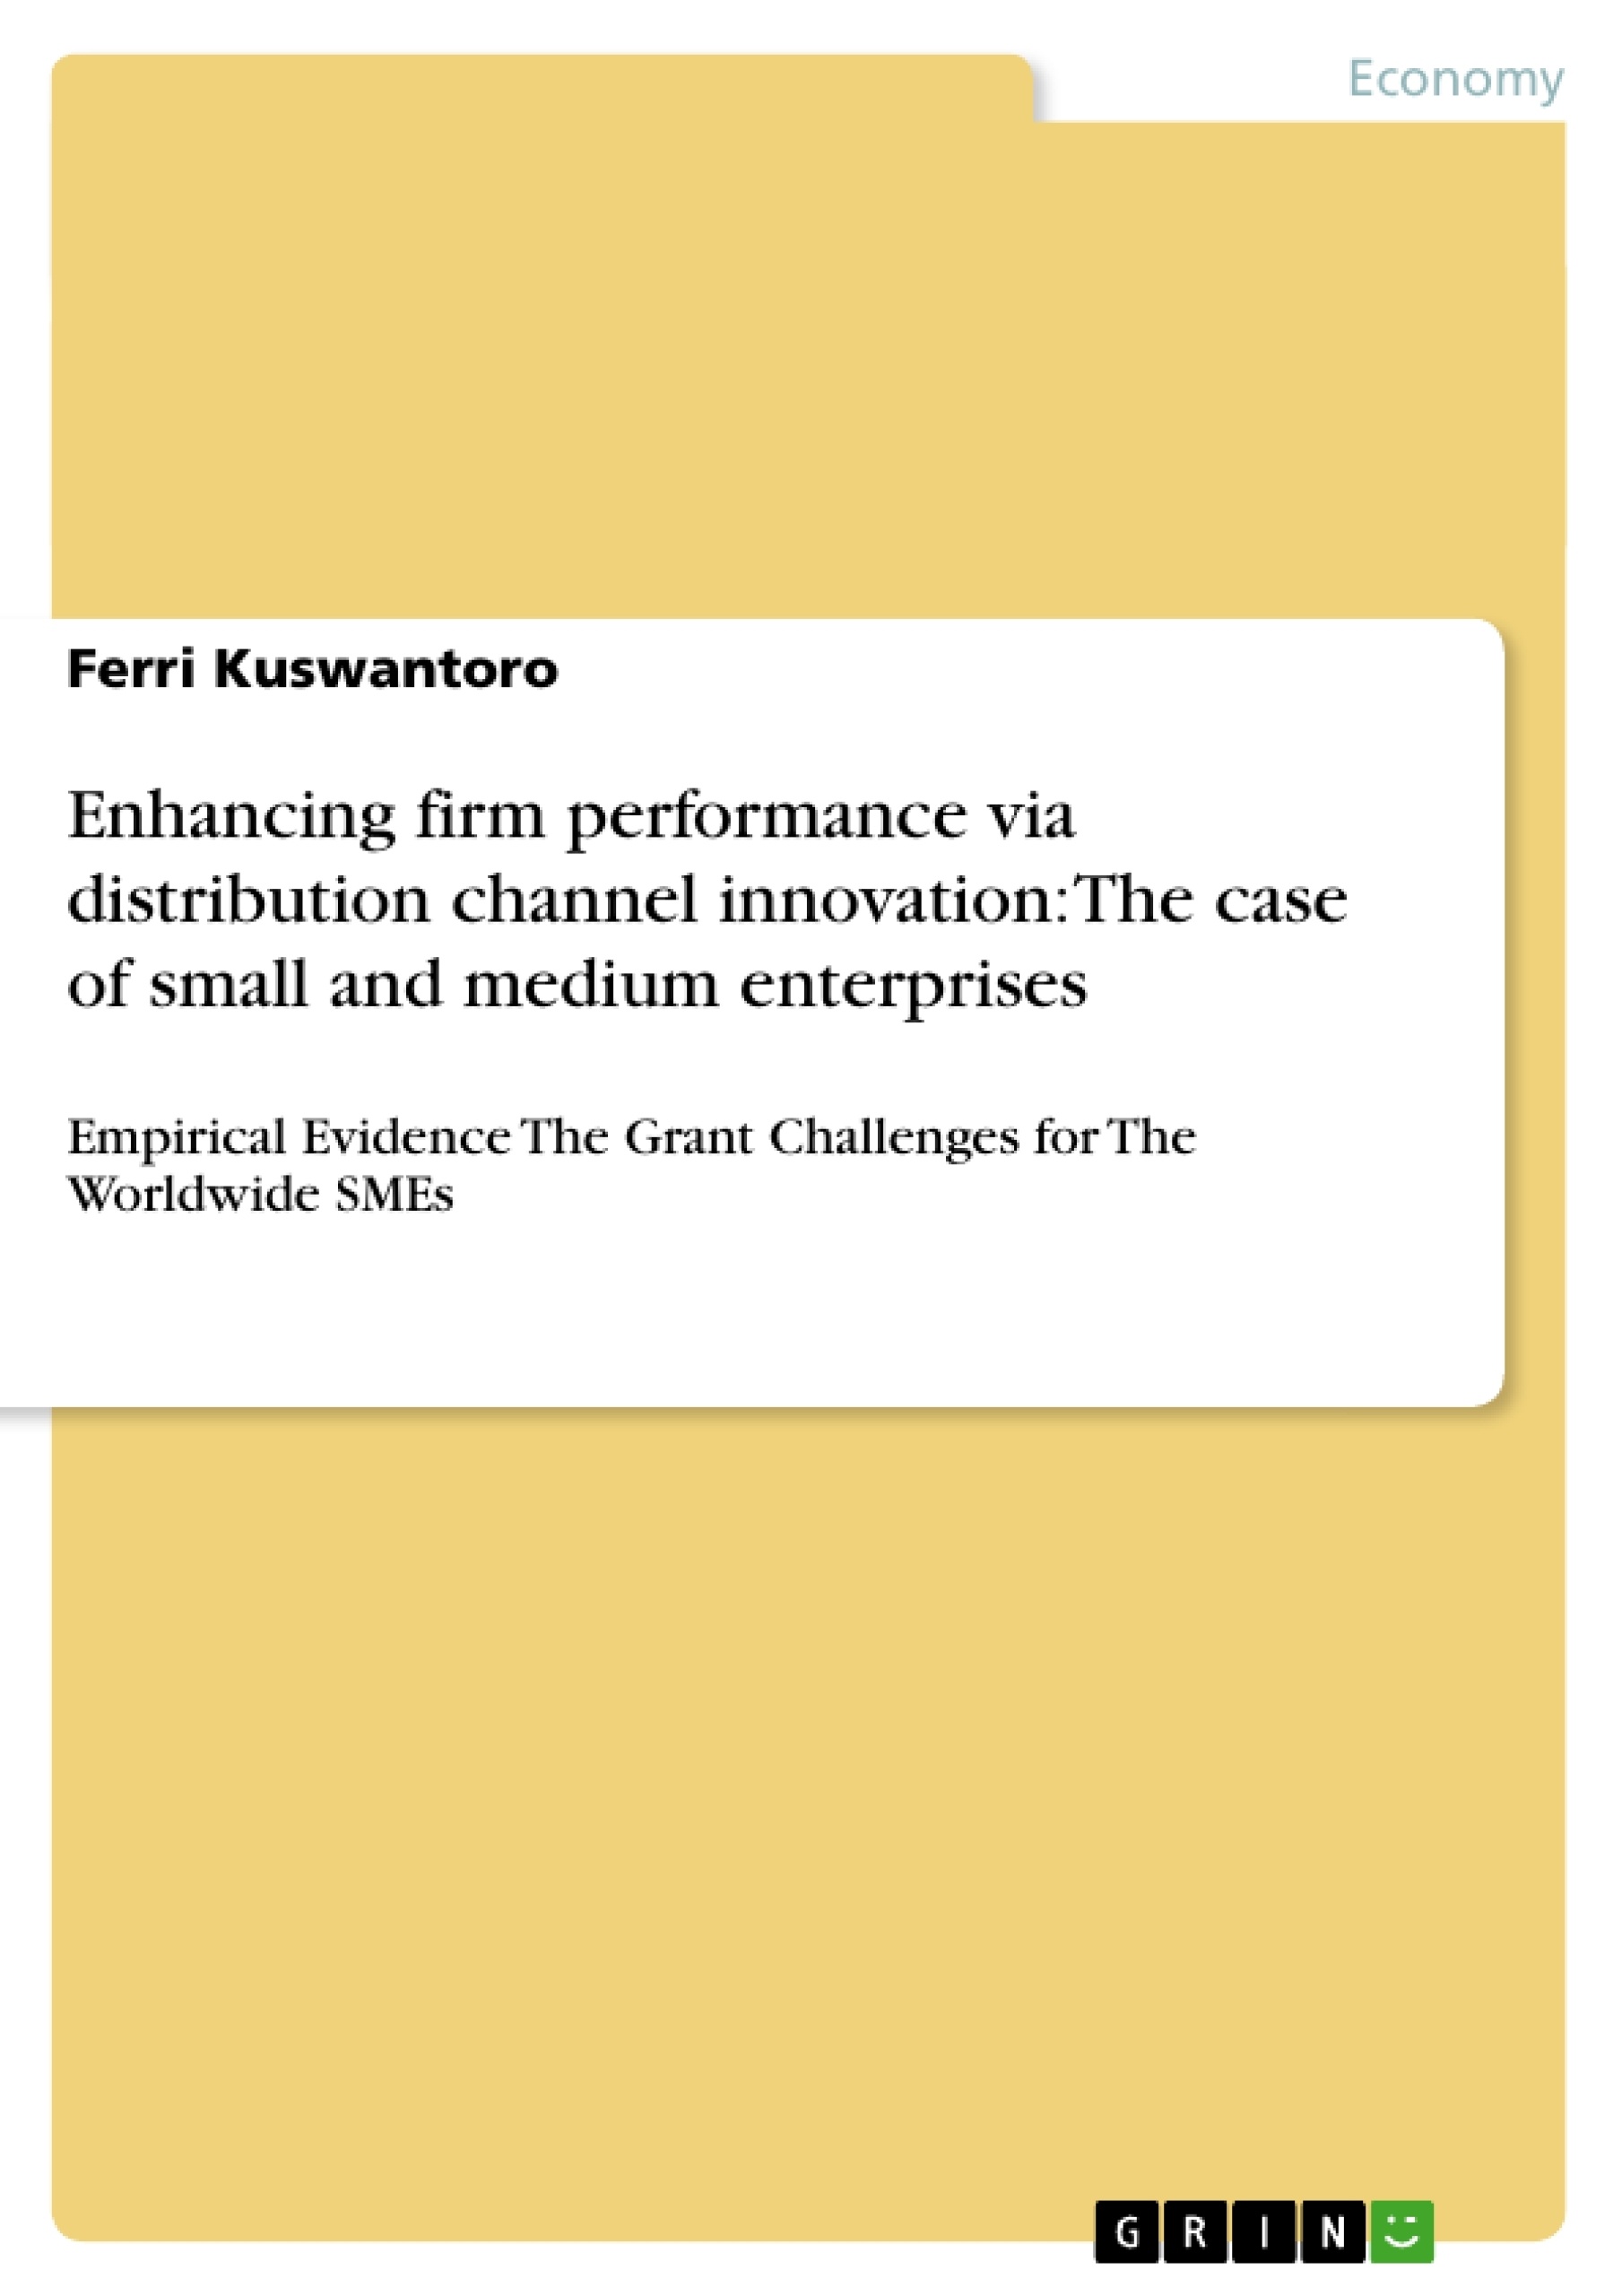 Title: Enhancing firm performance via distribution channel innovation: The case of small and medium enterprises